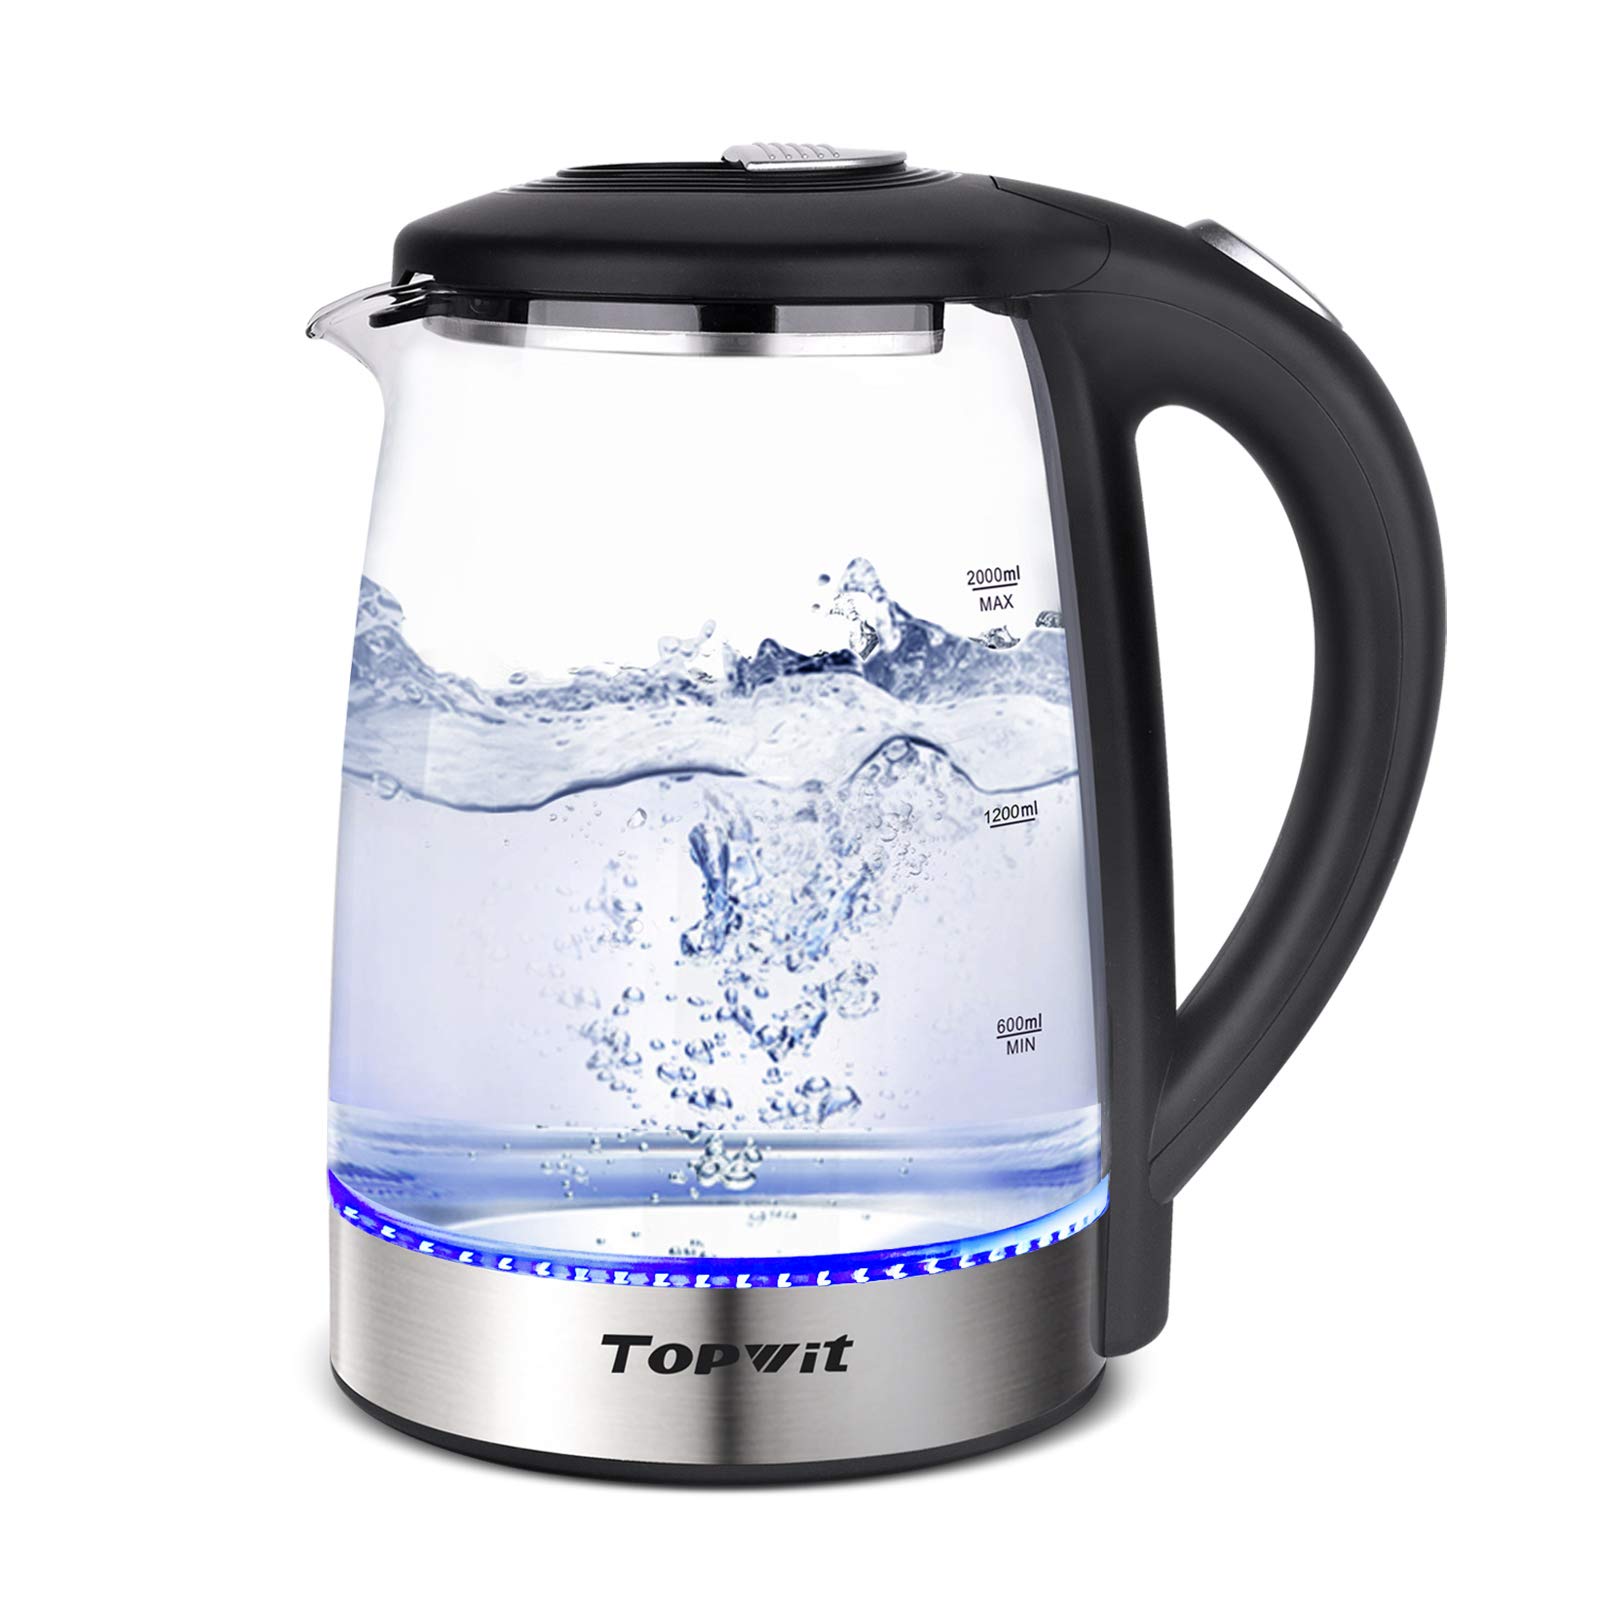 TOPWIT Electric Kettle Glass Hot Water Kettle, 2.0L Water Warmer, BPA-Free Stainless Steel Lid & Bottom, Tea Kettle with Fast Heating, Auto Shut-Off & Boil Dry Protection Glass Kettle-Black